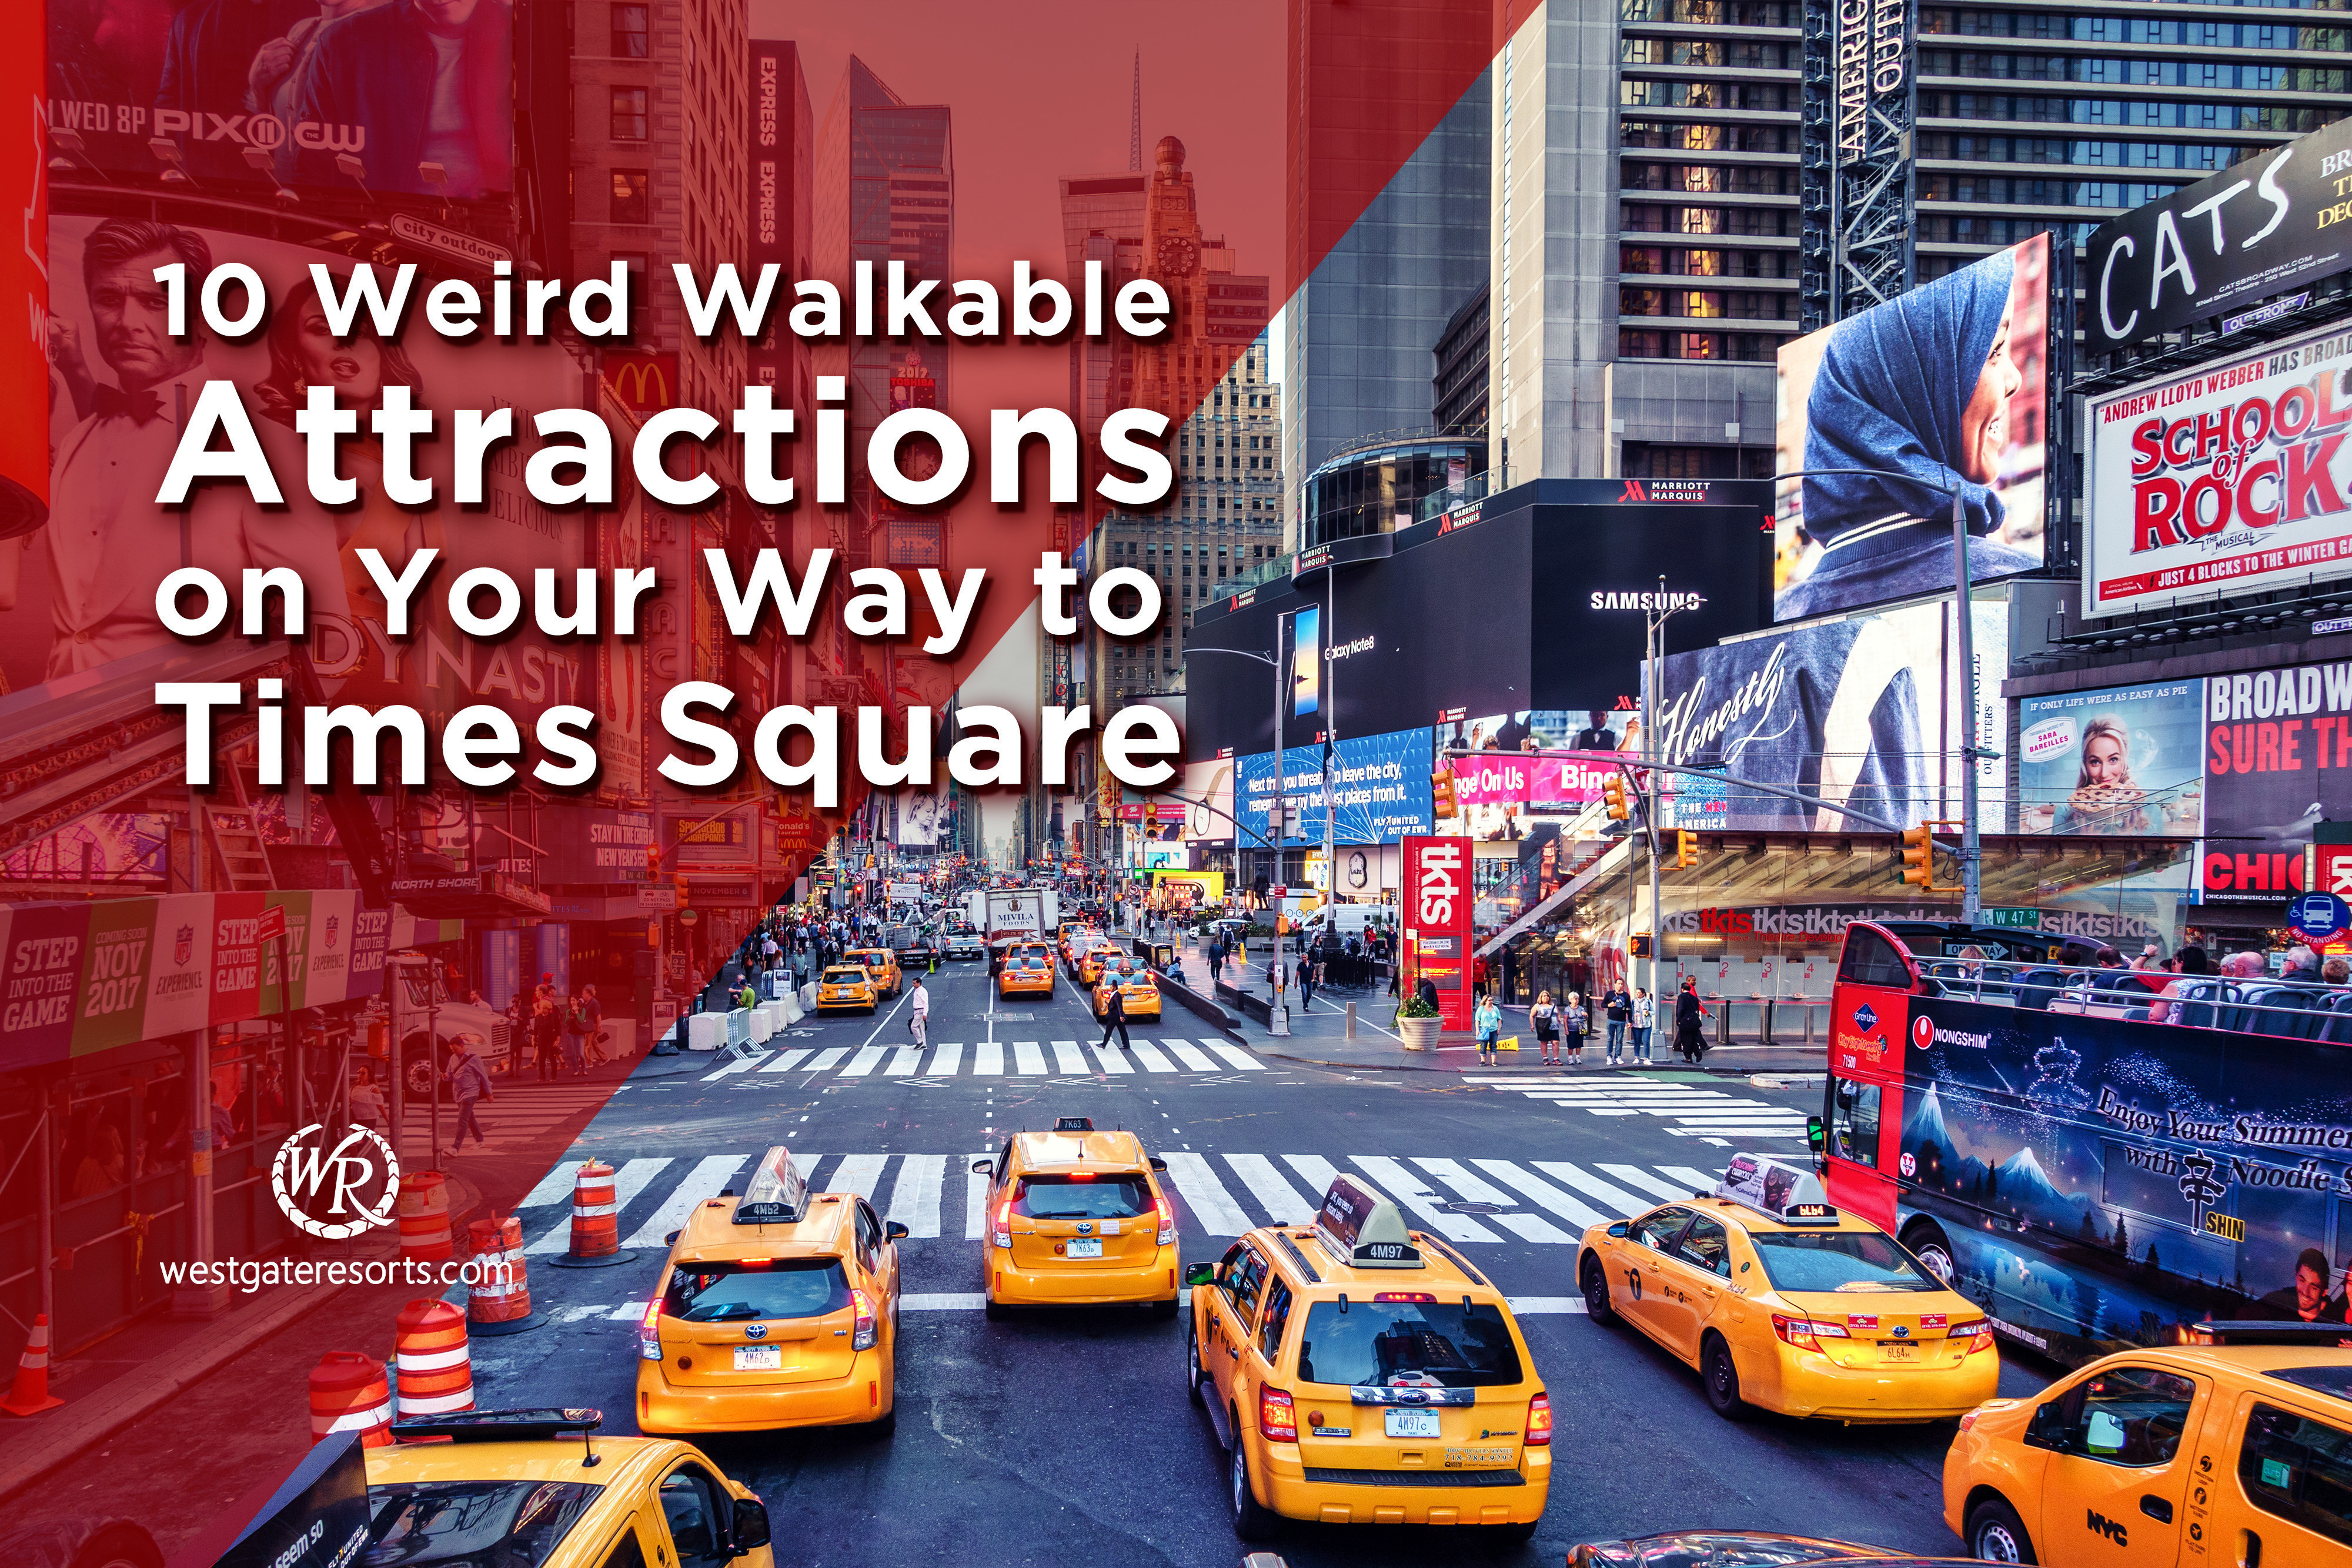 10 Weird Walkable Attractions on Your Way to Times Square